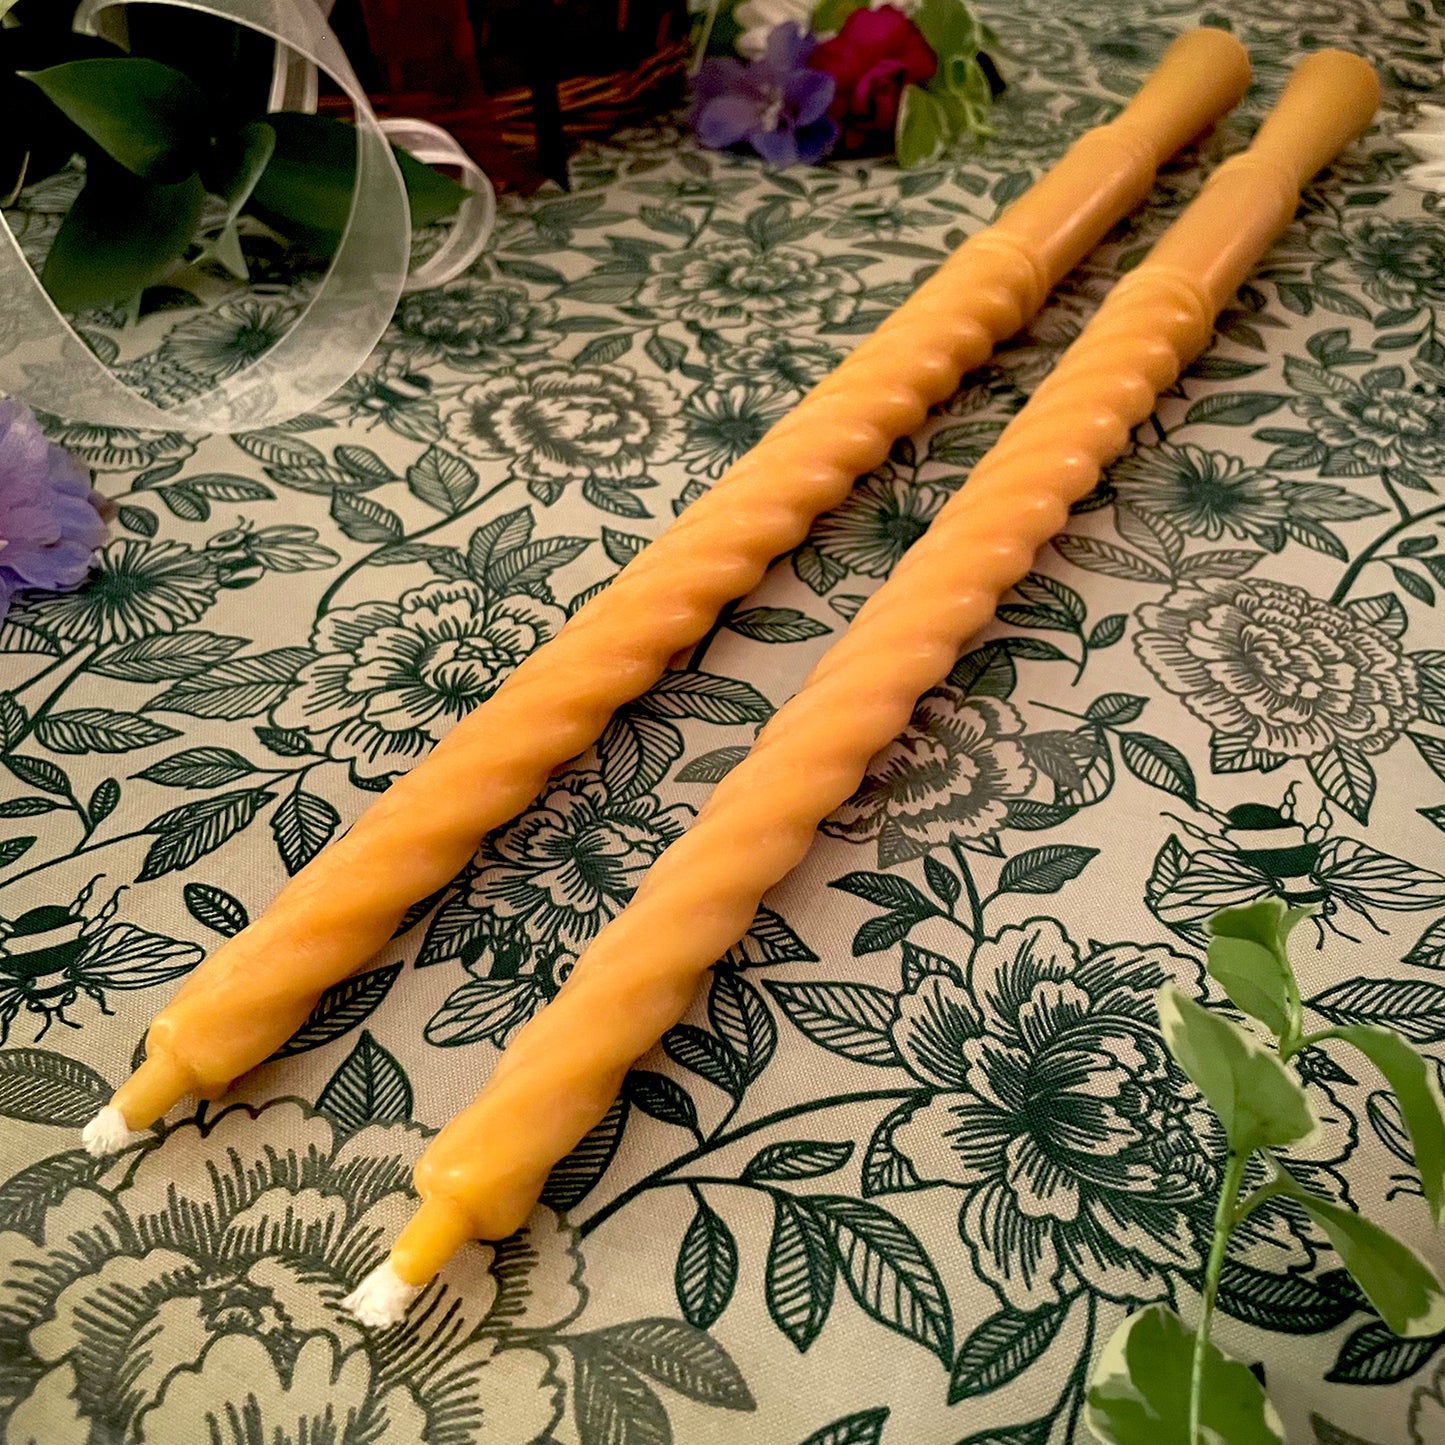 Traditional Wedding Candles - Set of 2 (Golden Beeswax, 17 in)